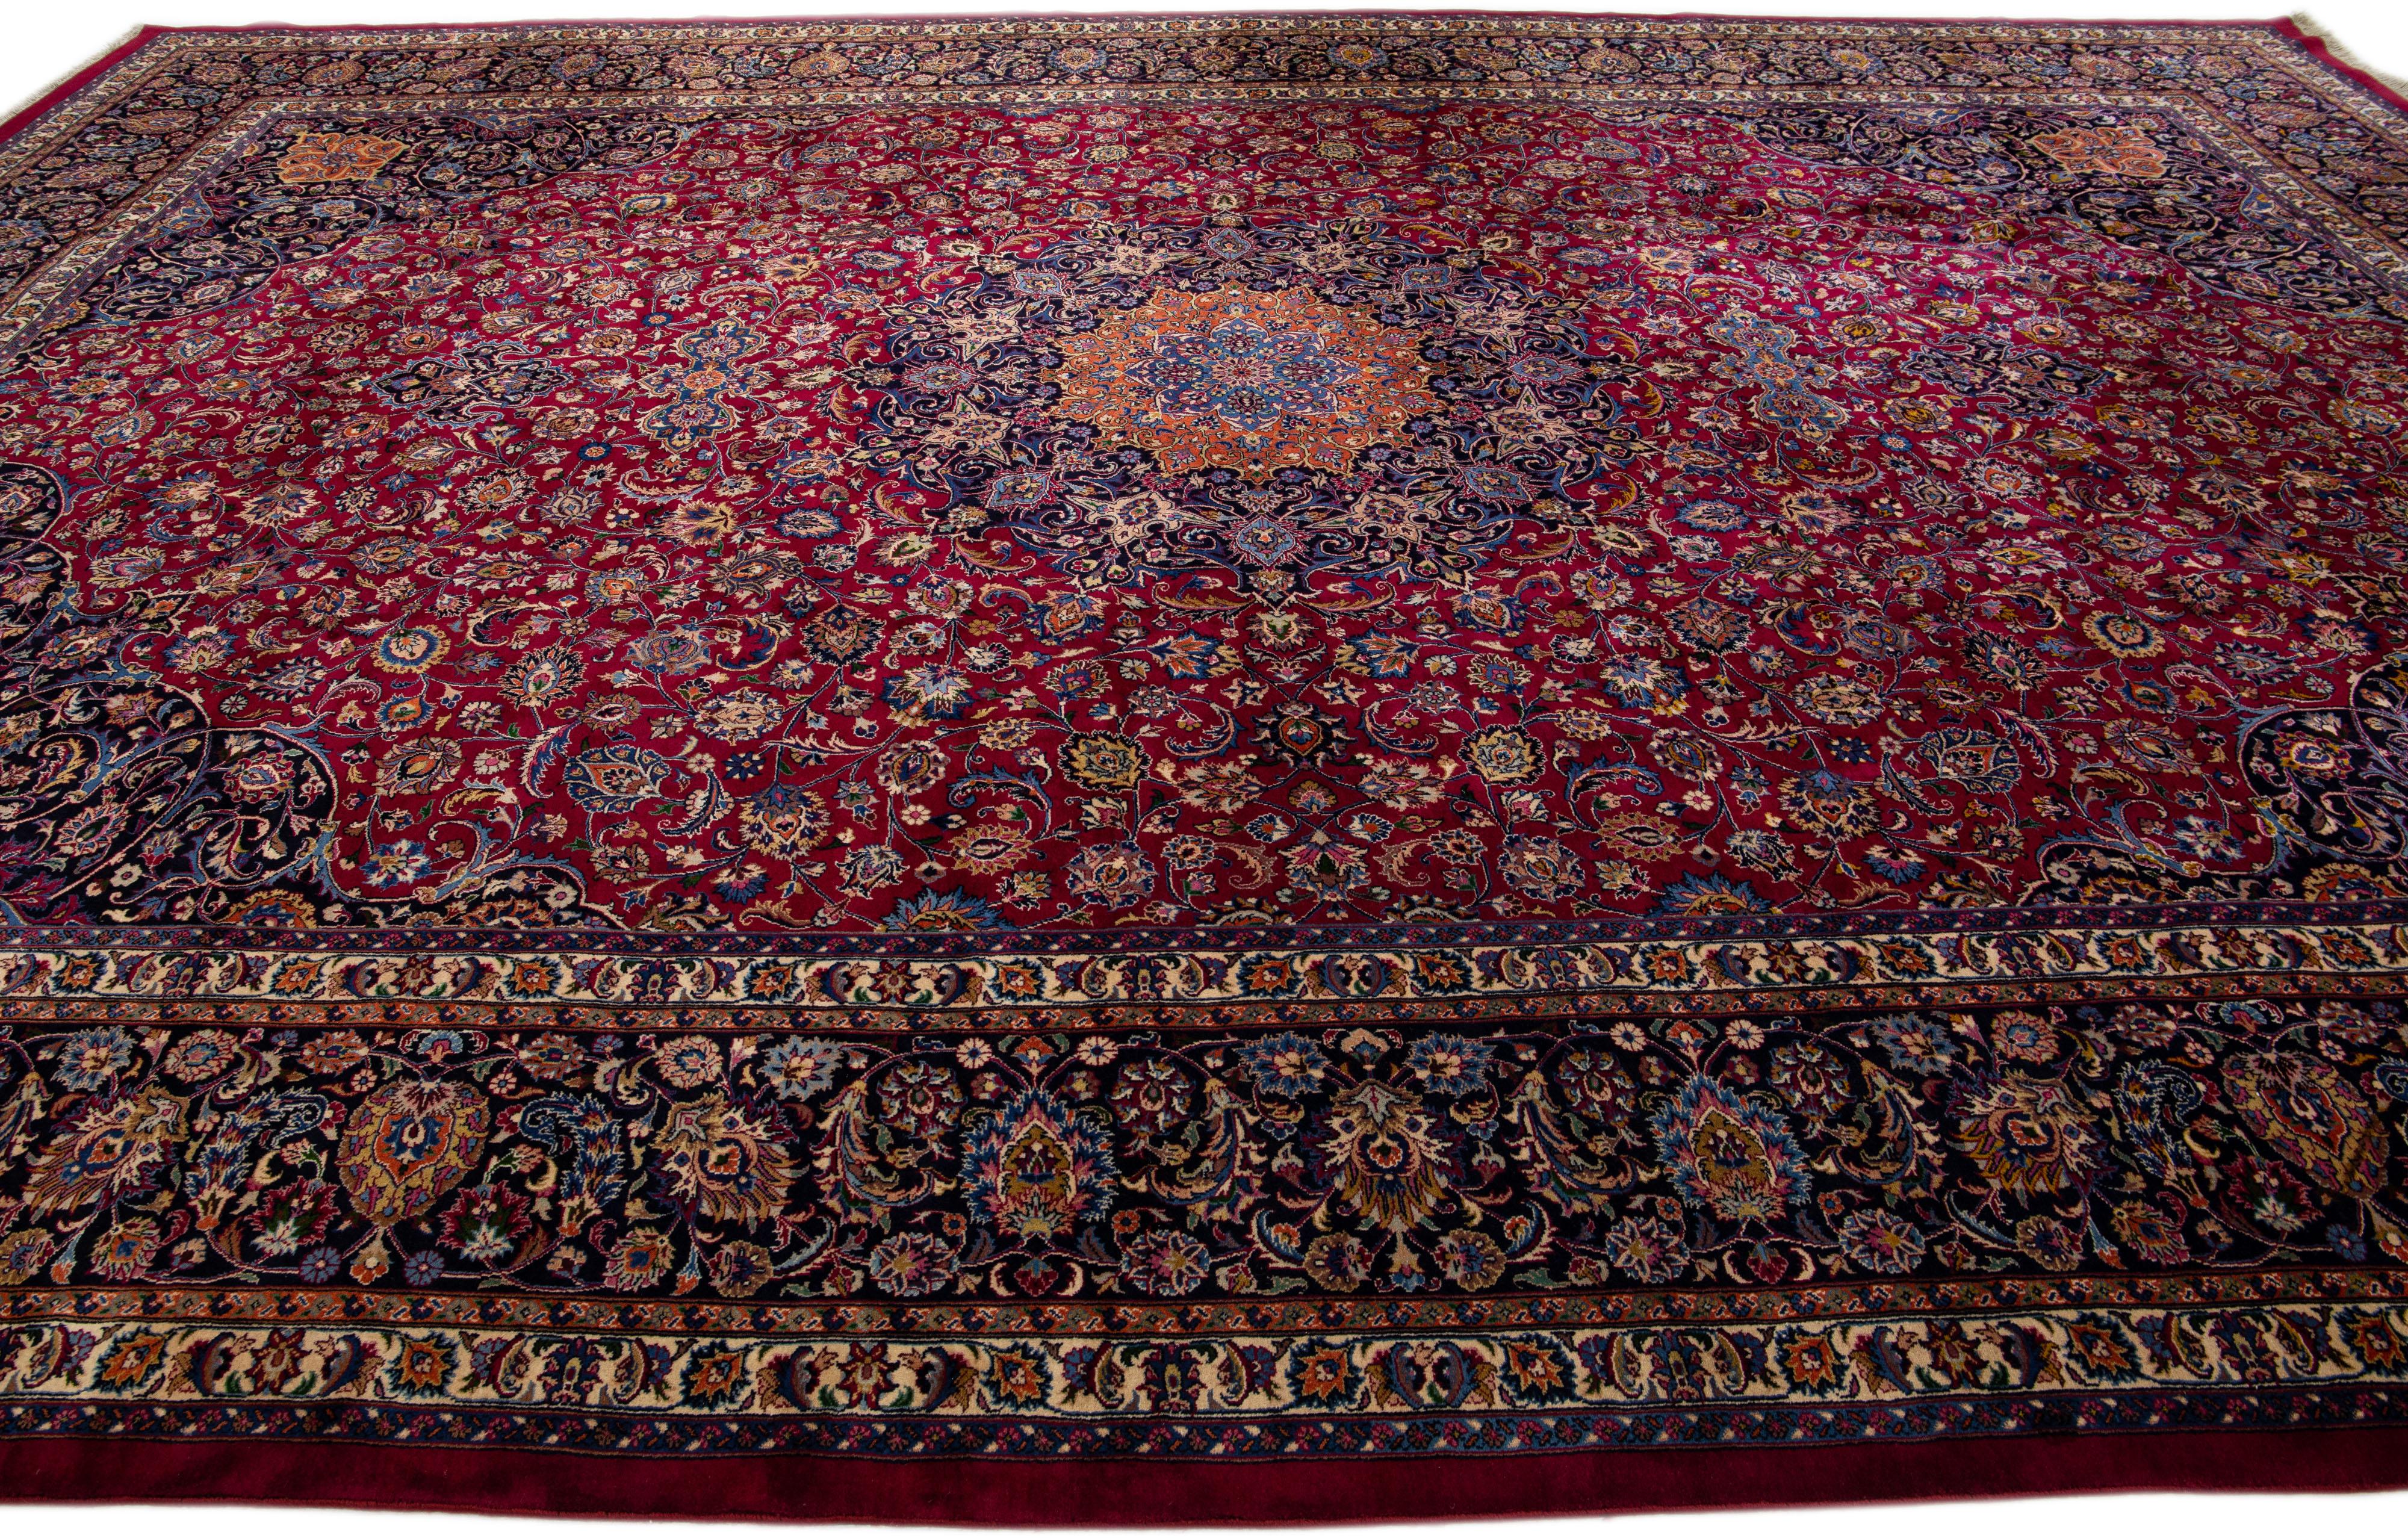 Antique Persian Mashad Handmade Red Oversize Wool Rug with Rosette Motif  In Good Condition For Sale In Norwalk, CT